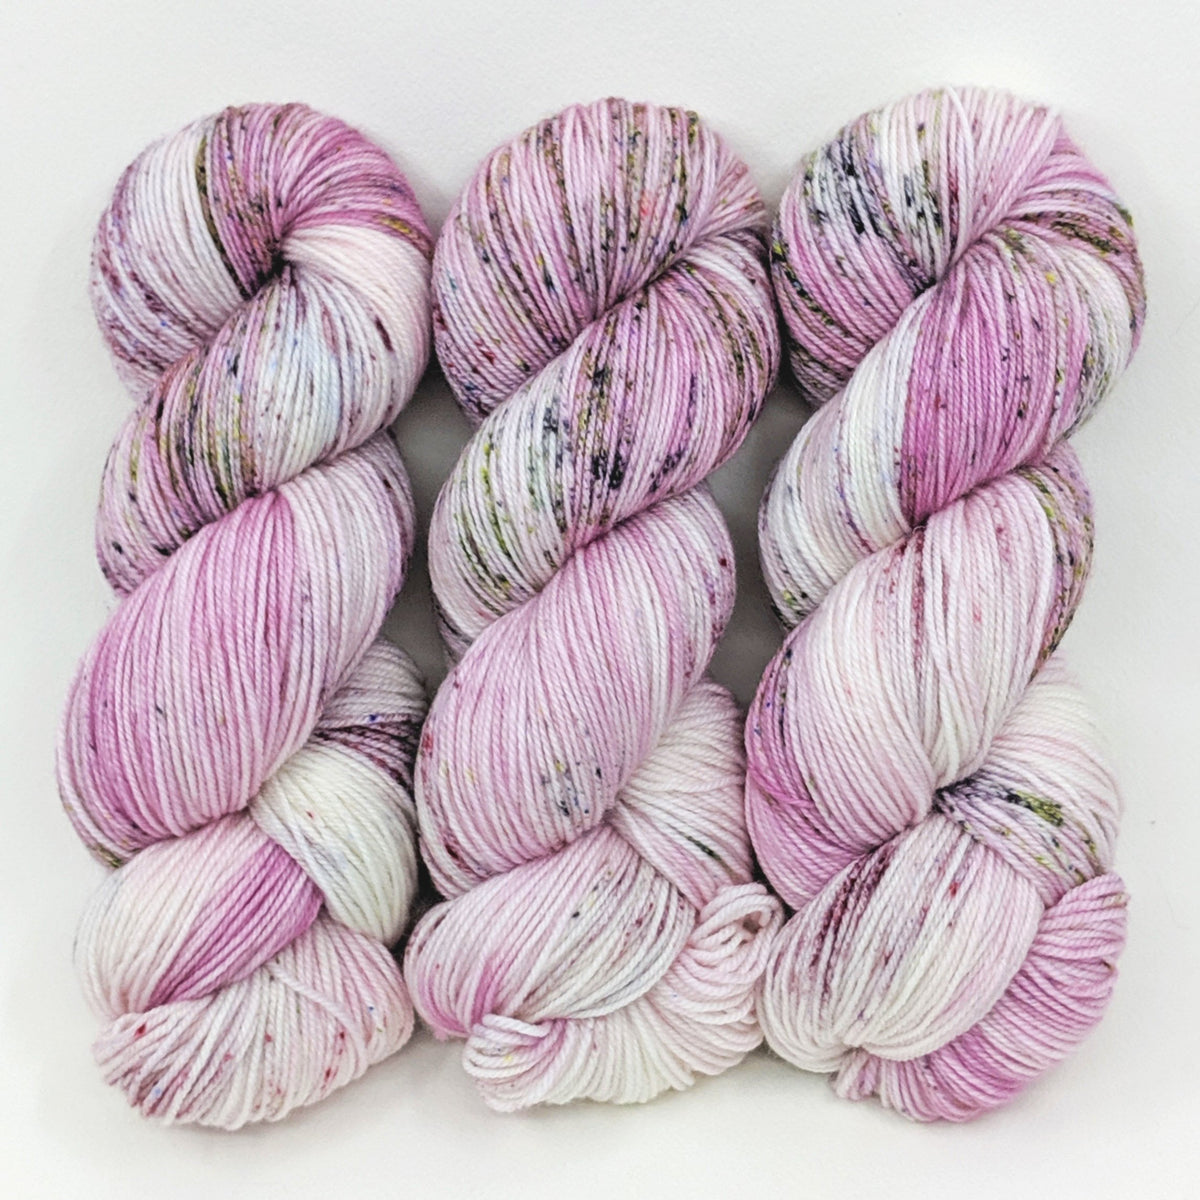 Tiny Orchid - Merino DK / Light Worsted - Dyed Stock